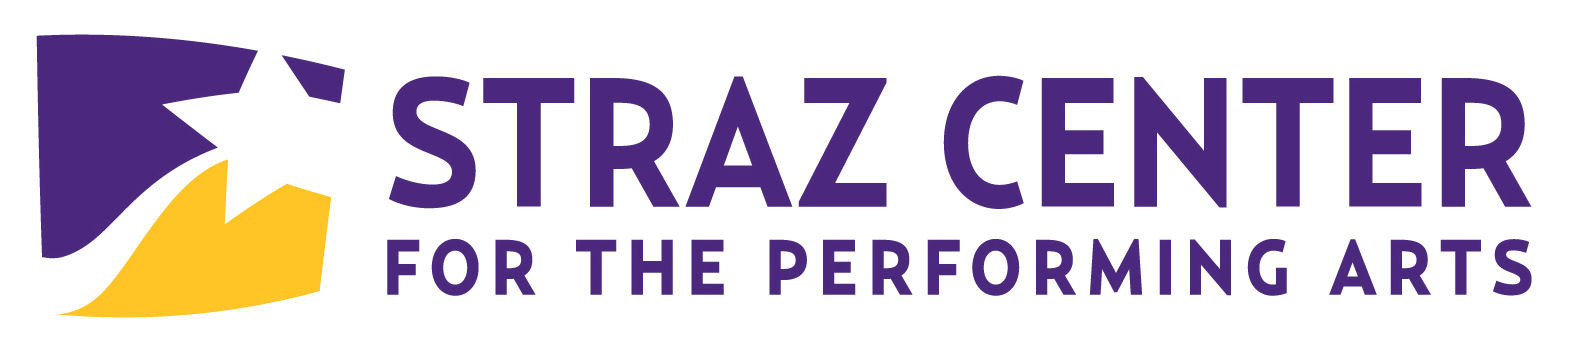 Straz-Center-for-the-Performing-Arts